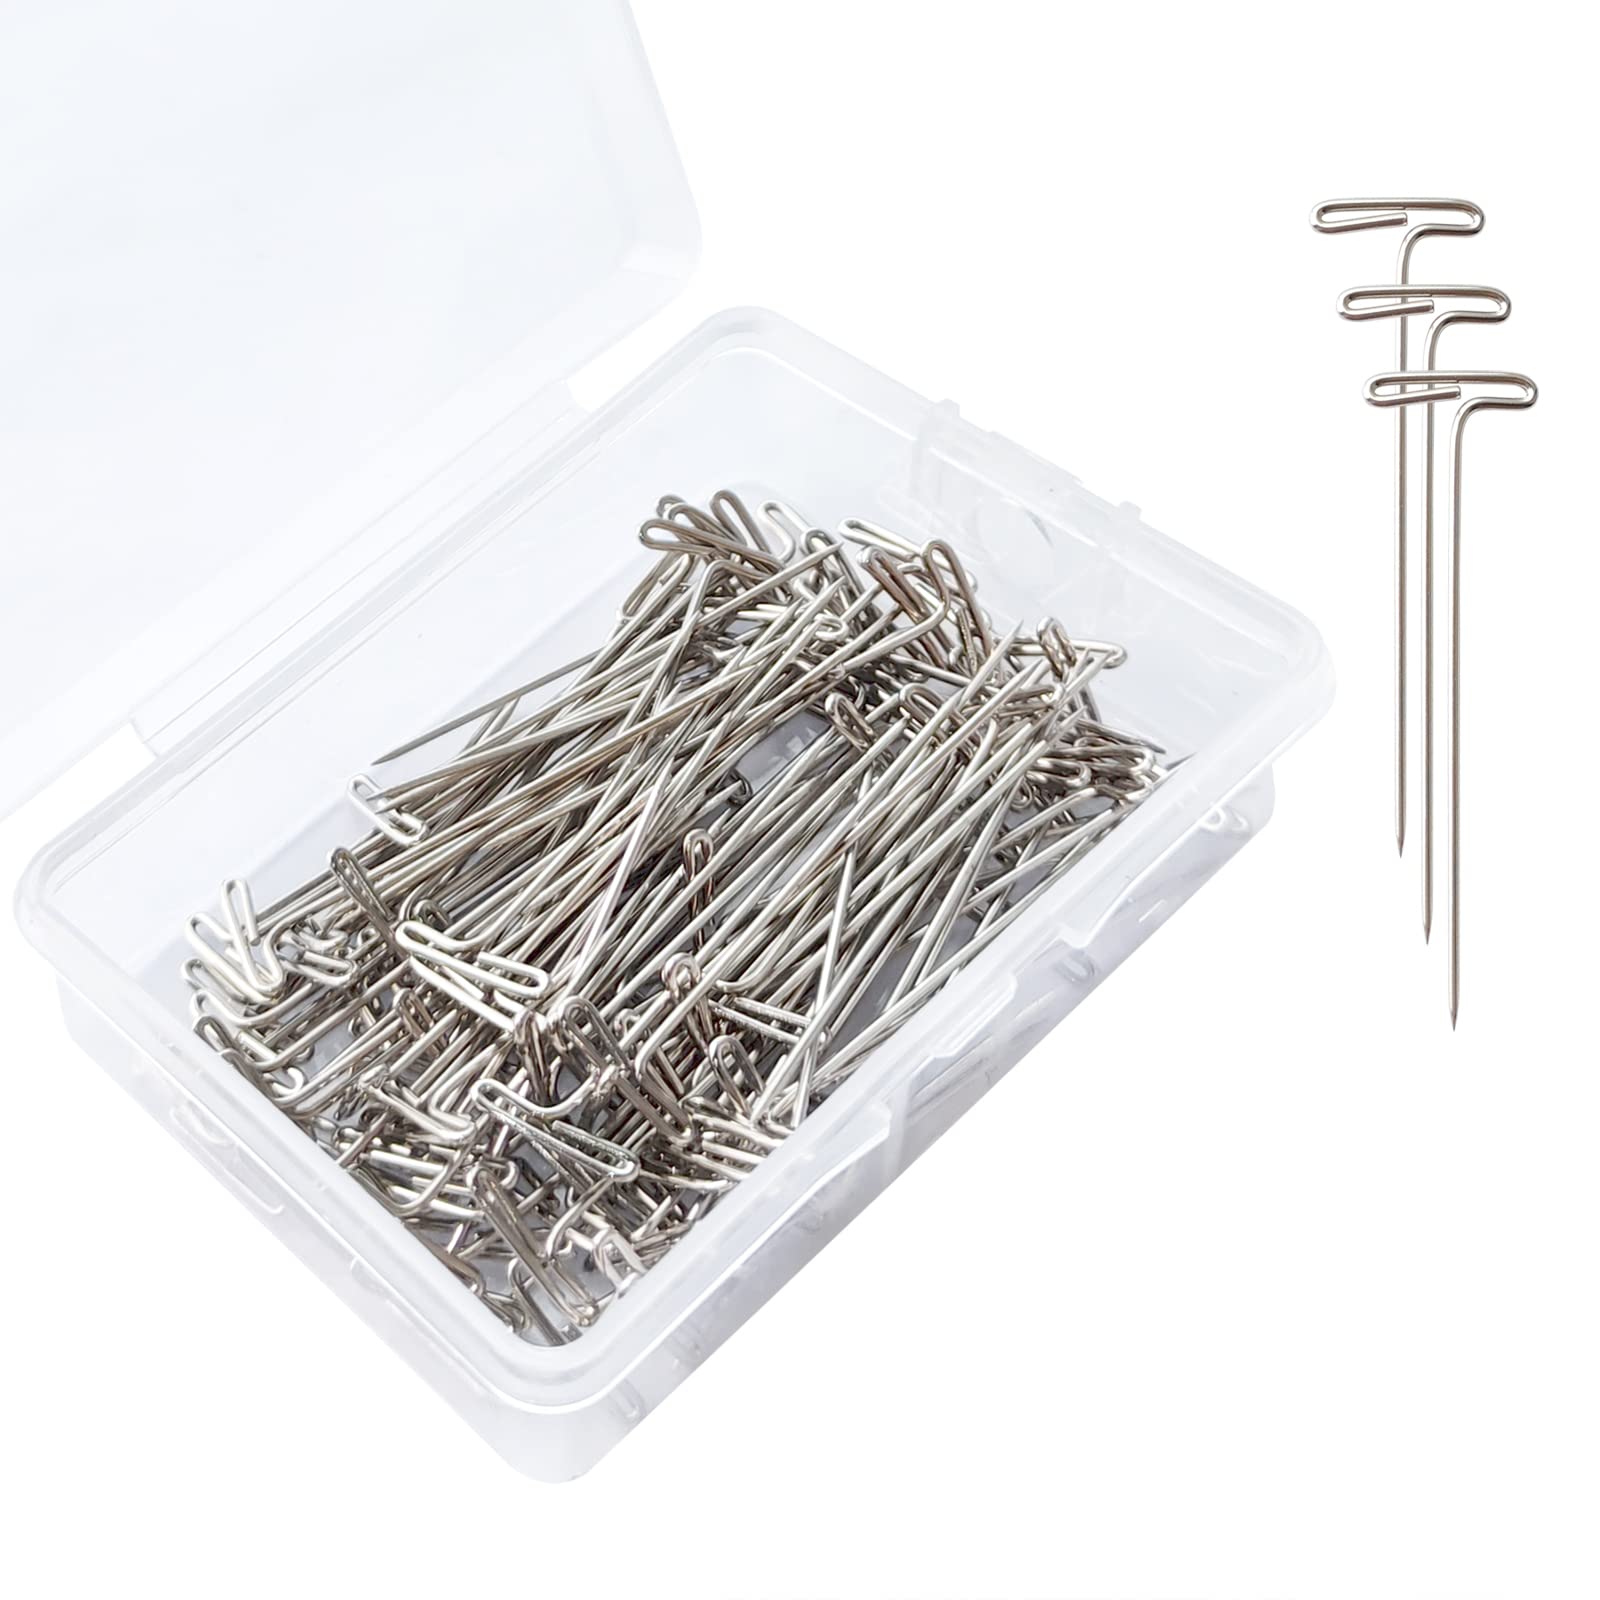  SOLUSTRE 400 Pcs Wig T-pin Straight Pin Black People Wig  Essentials Wig Heads Sewing t Pin Wig Making Sewing Wig Sewing Pin Foam  Head Wig Crochet Knitting Stainless Steel Office Metal 